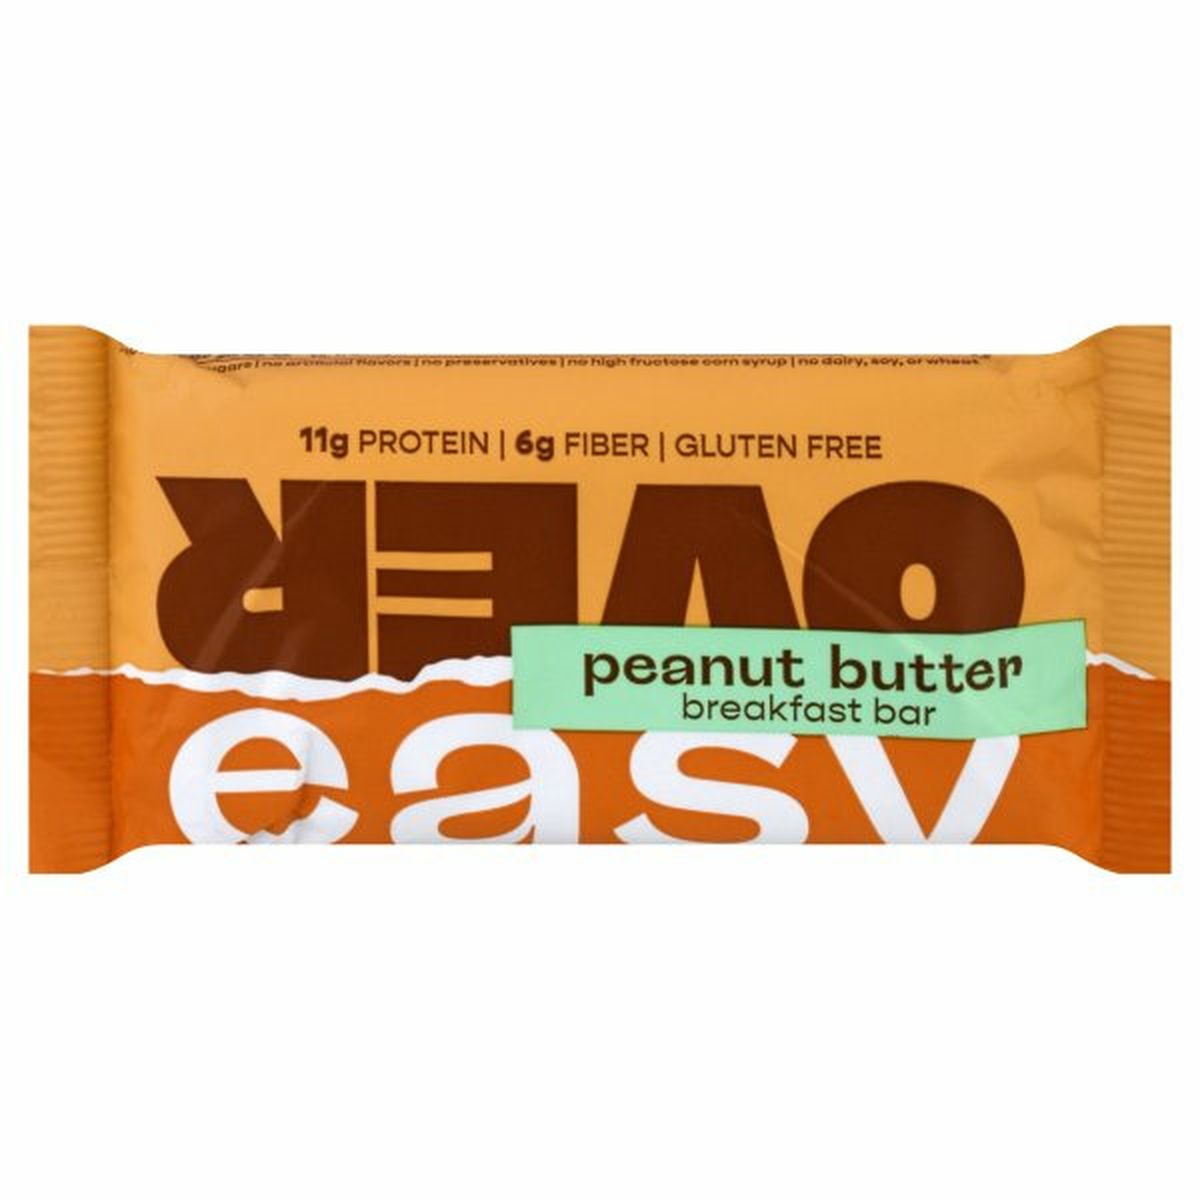 Calories in Over Easy Breakfast Bar, Peanut Butter